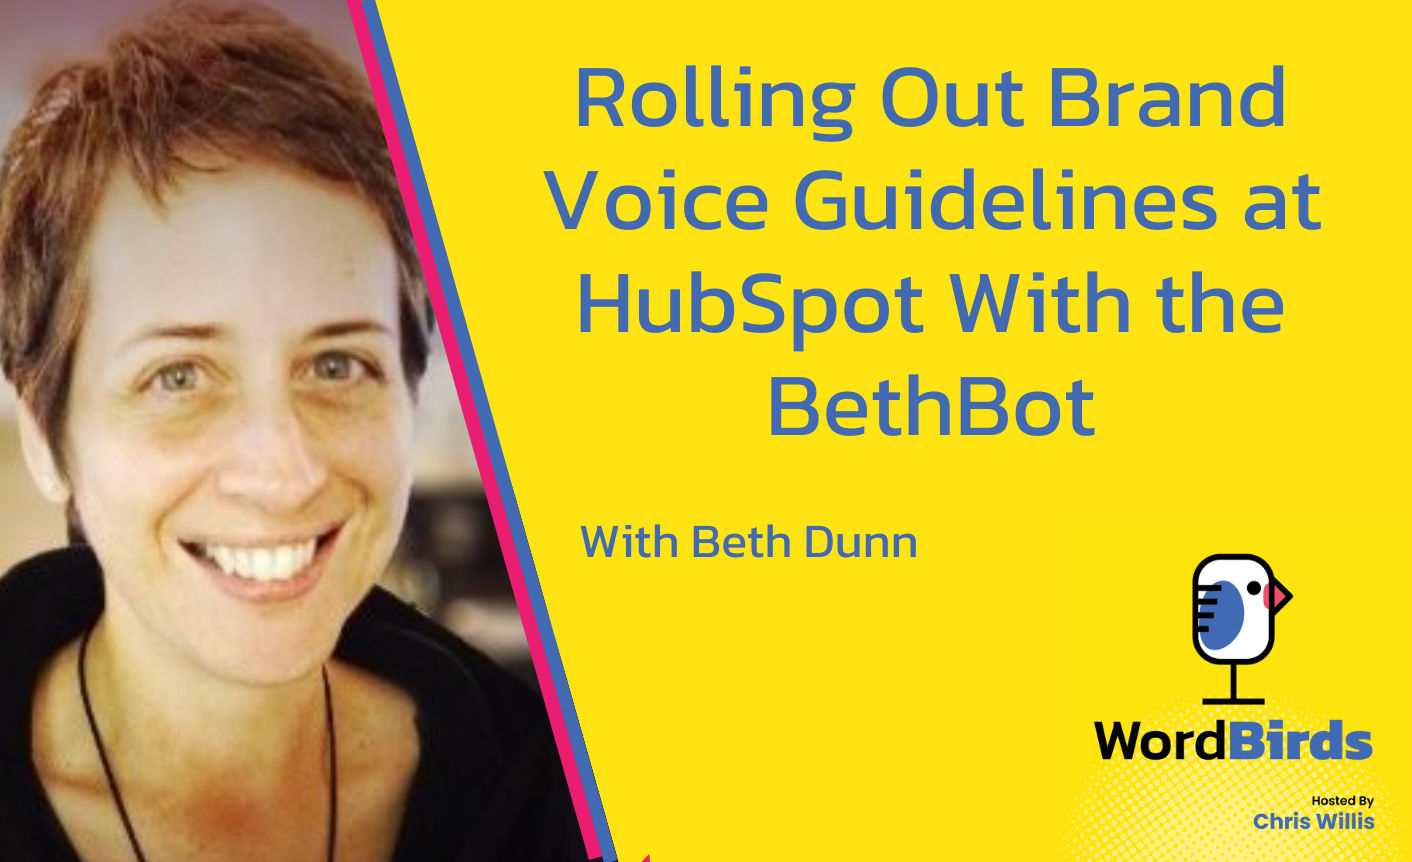 On the left of the image is a headshot of Beth Dunn. On the center and right, on a yellow background, is the title "Rolling Out Brand Voice Guidelines at HubSpot With the BethBot."